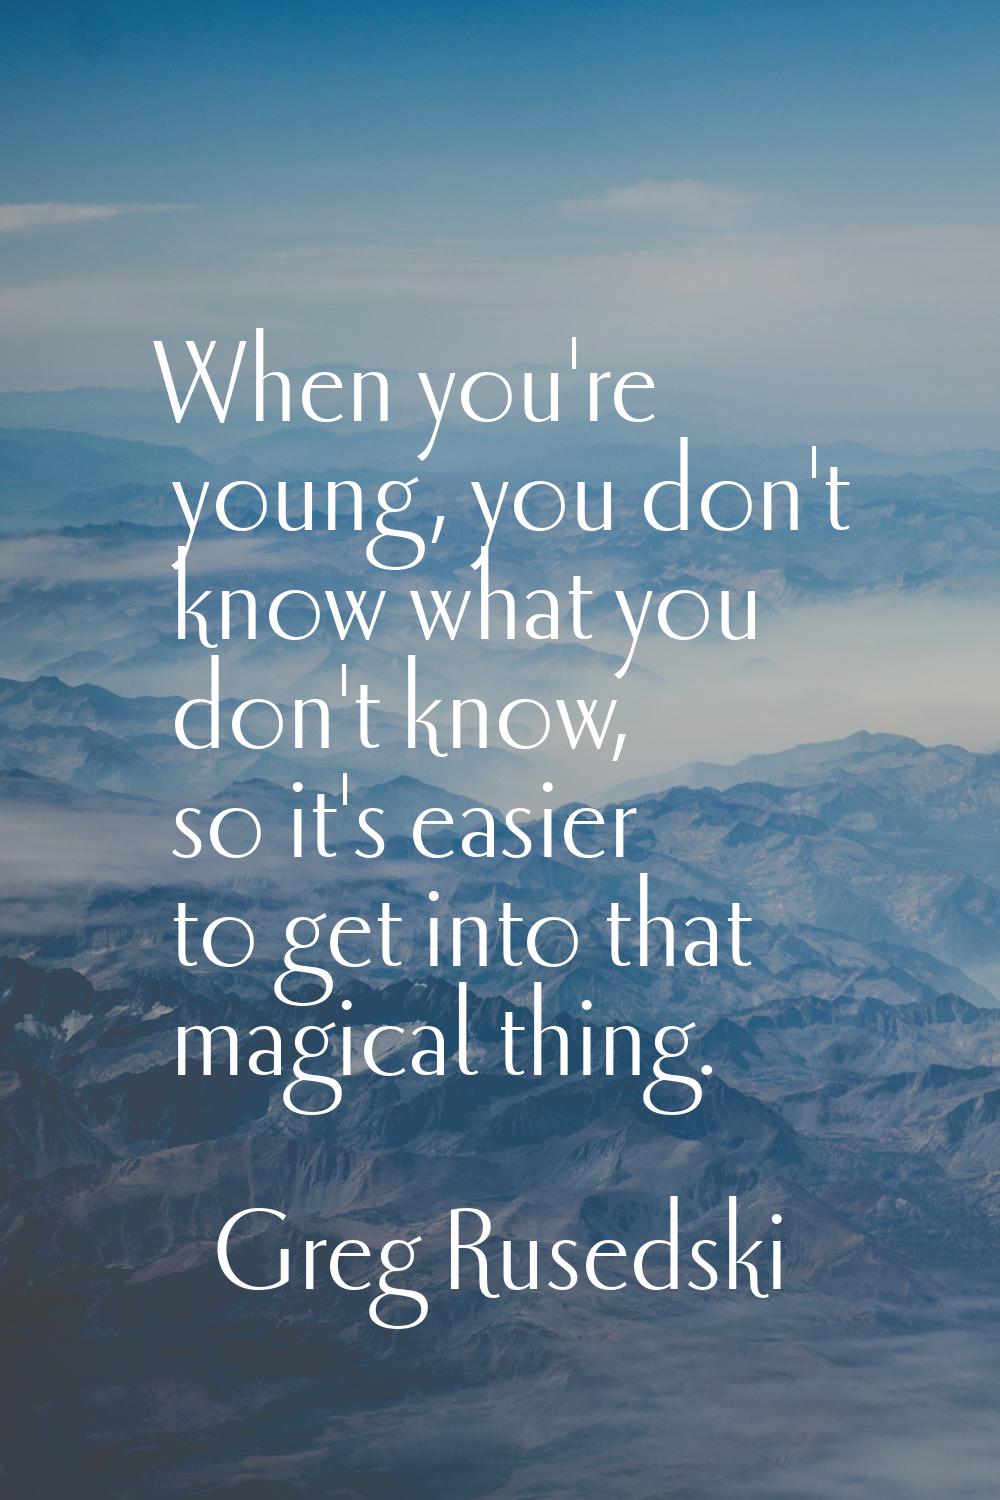 When you're young, you don't know what you don't know, so it's easier to get into that magical thin